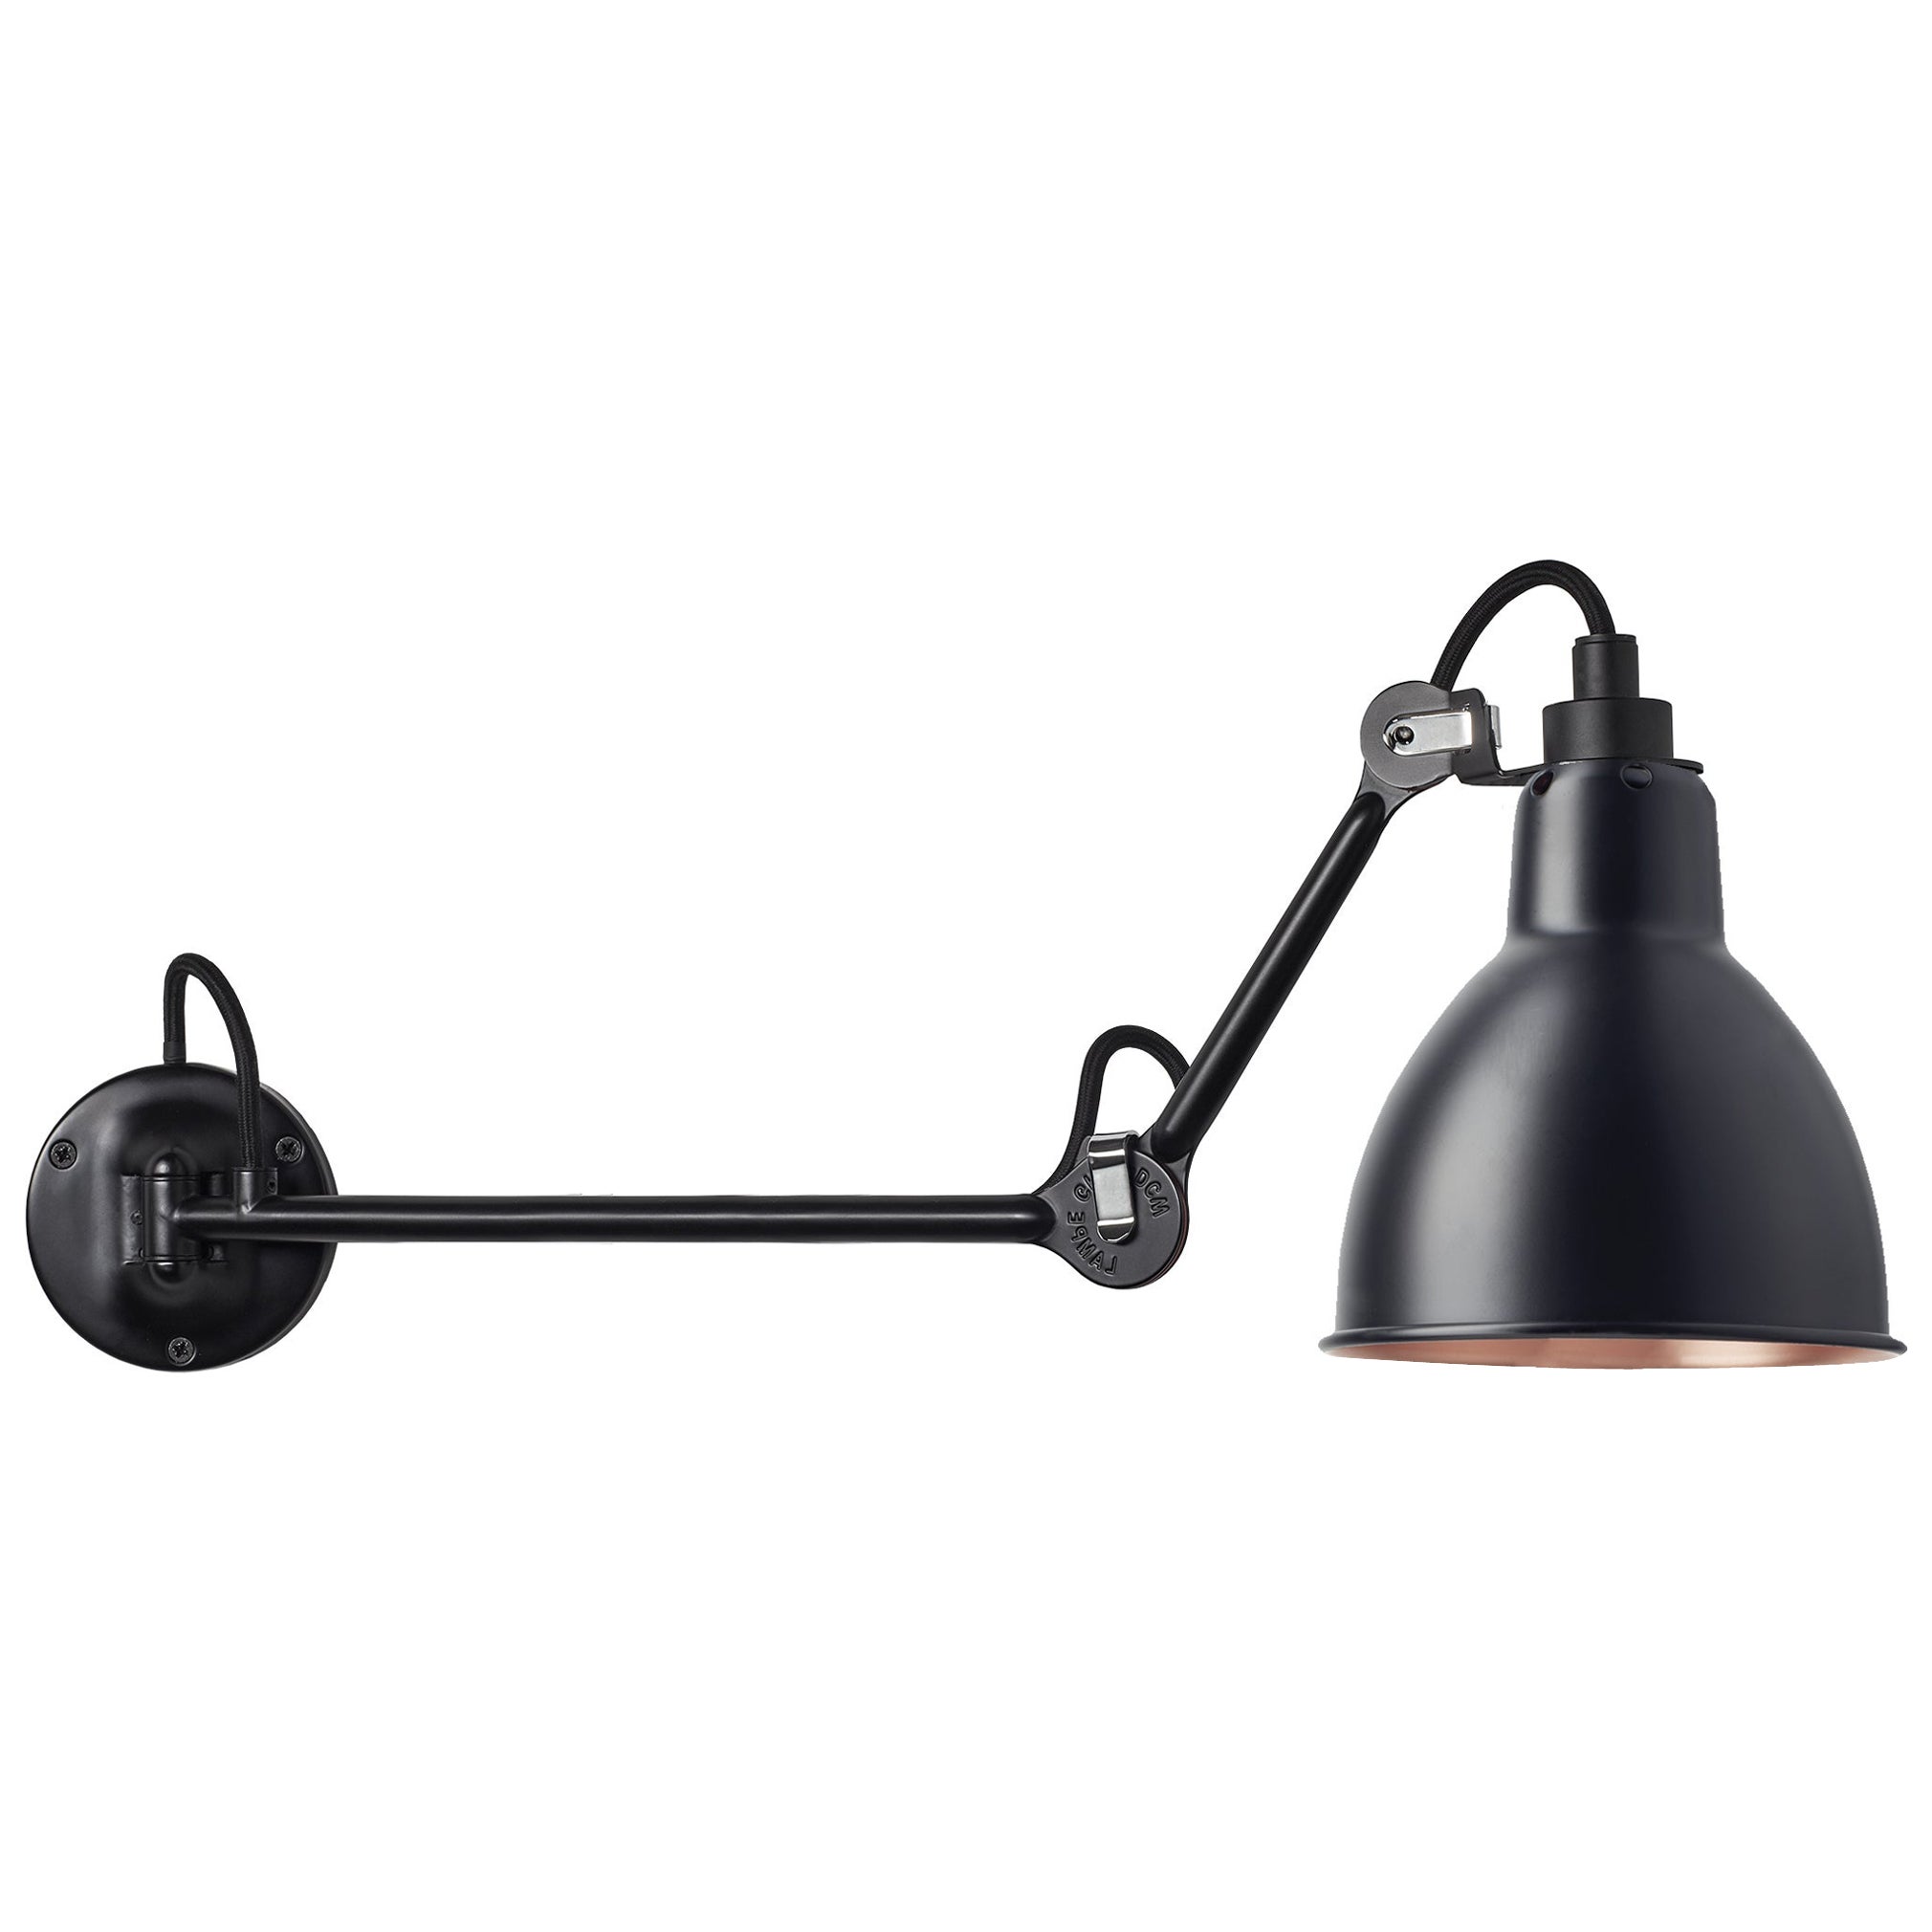 DCW Editions La Lampe Gras N°204 L40 Wall Lamp in Black Arm & Black Copper Shade For Sale